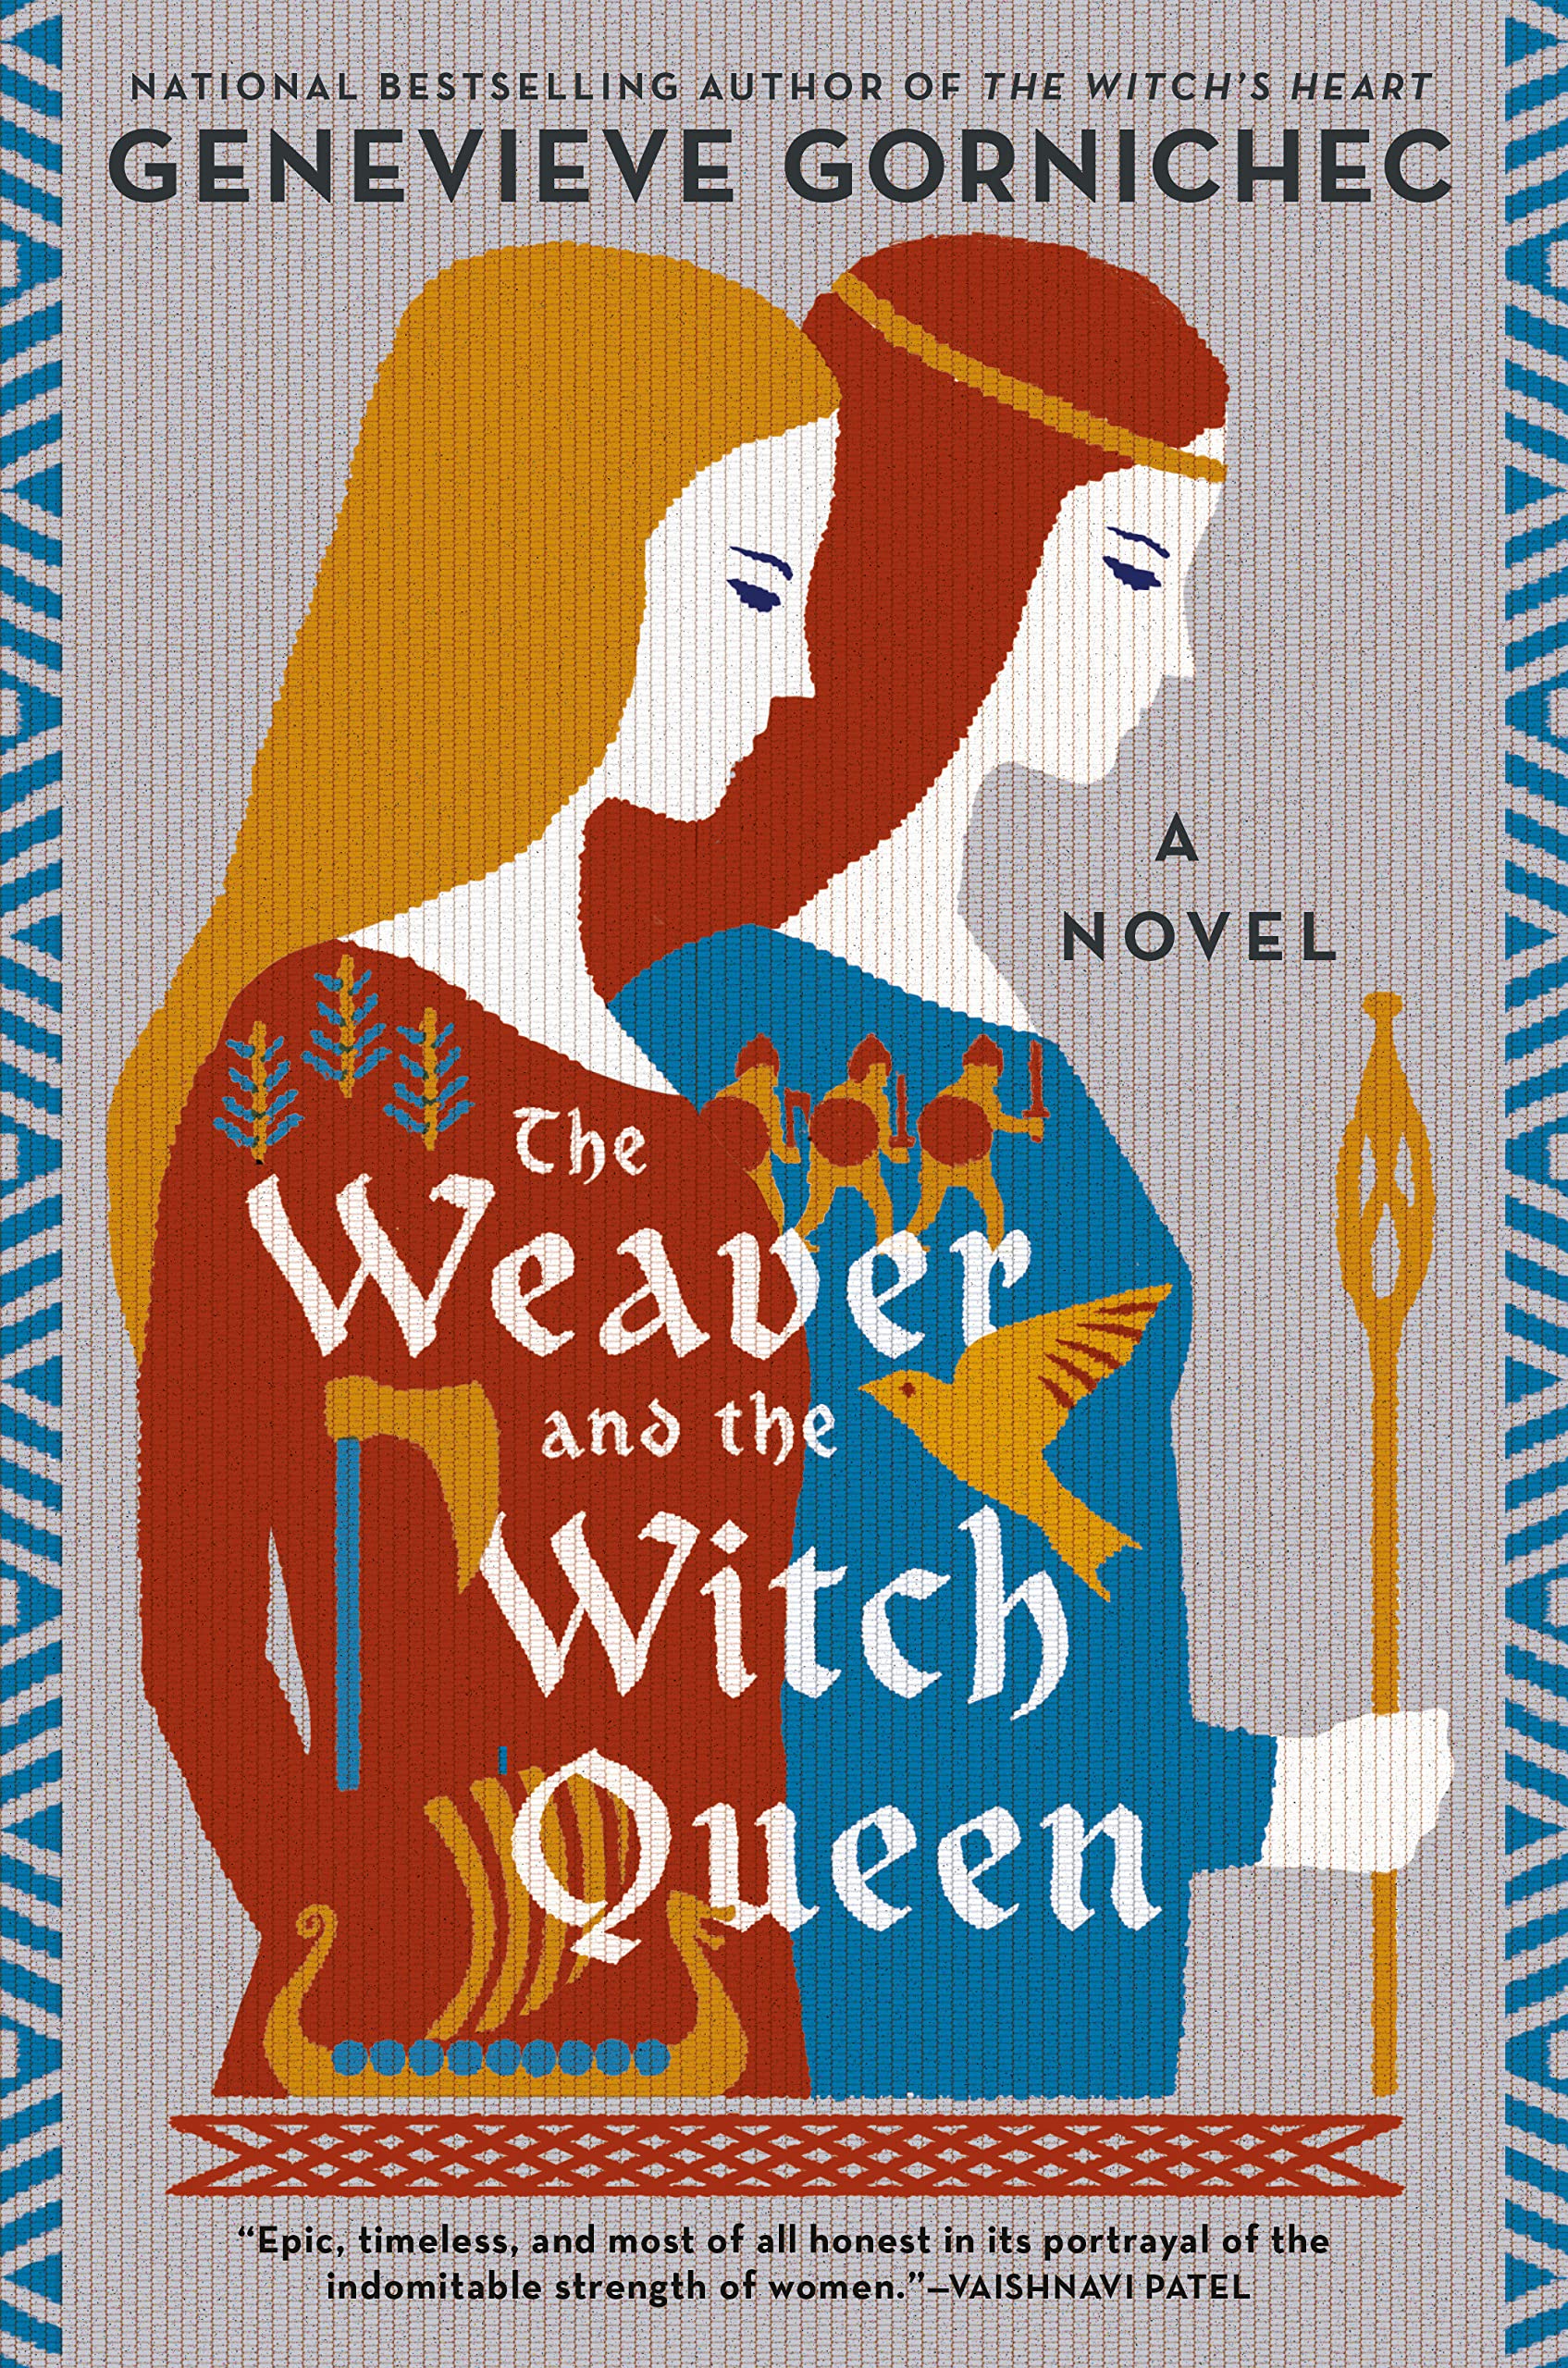 Image for "The Weaver and the Witch Queen"